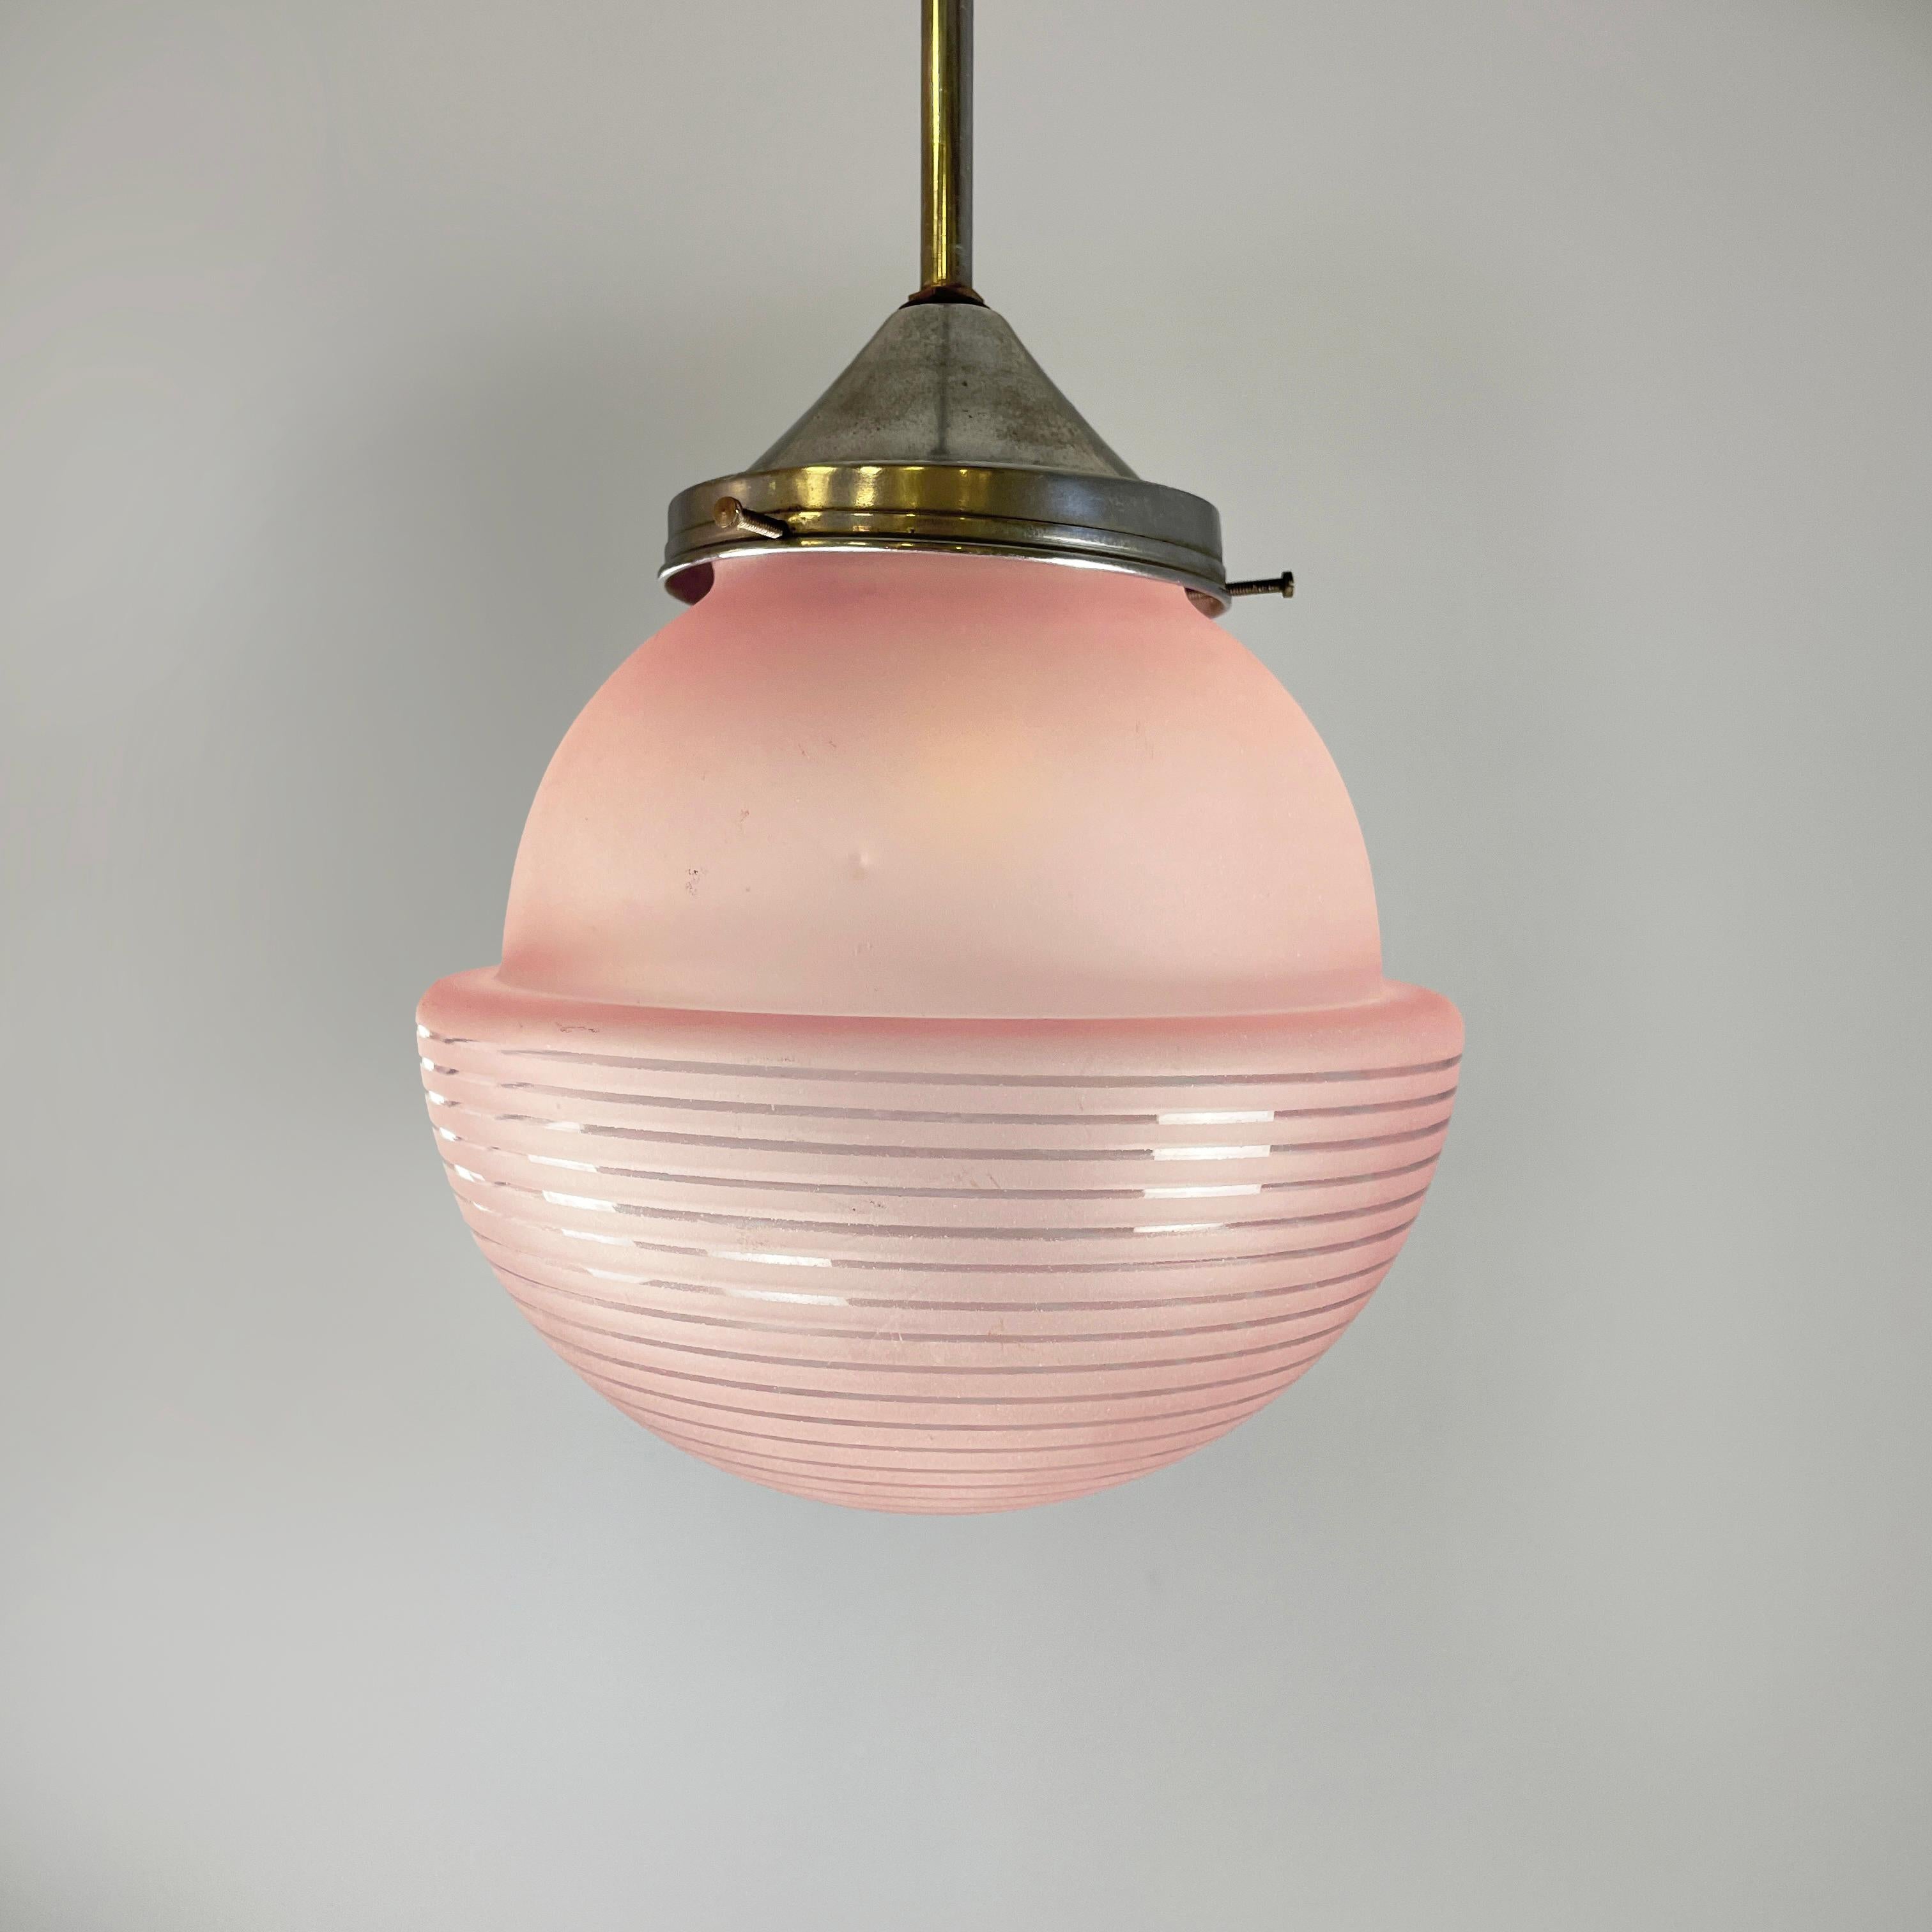 Mid-Century Modern Italian mid-century modern Ceiling lamp in pink glass and metal, 1940s